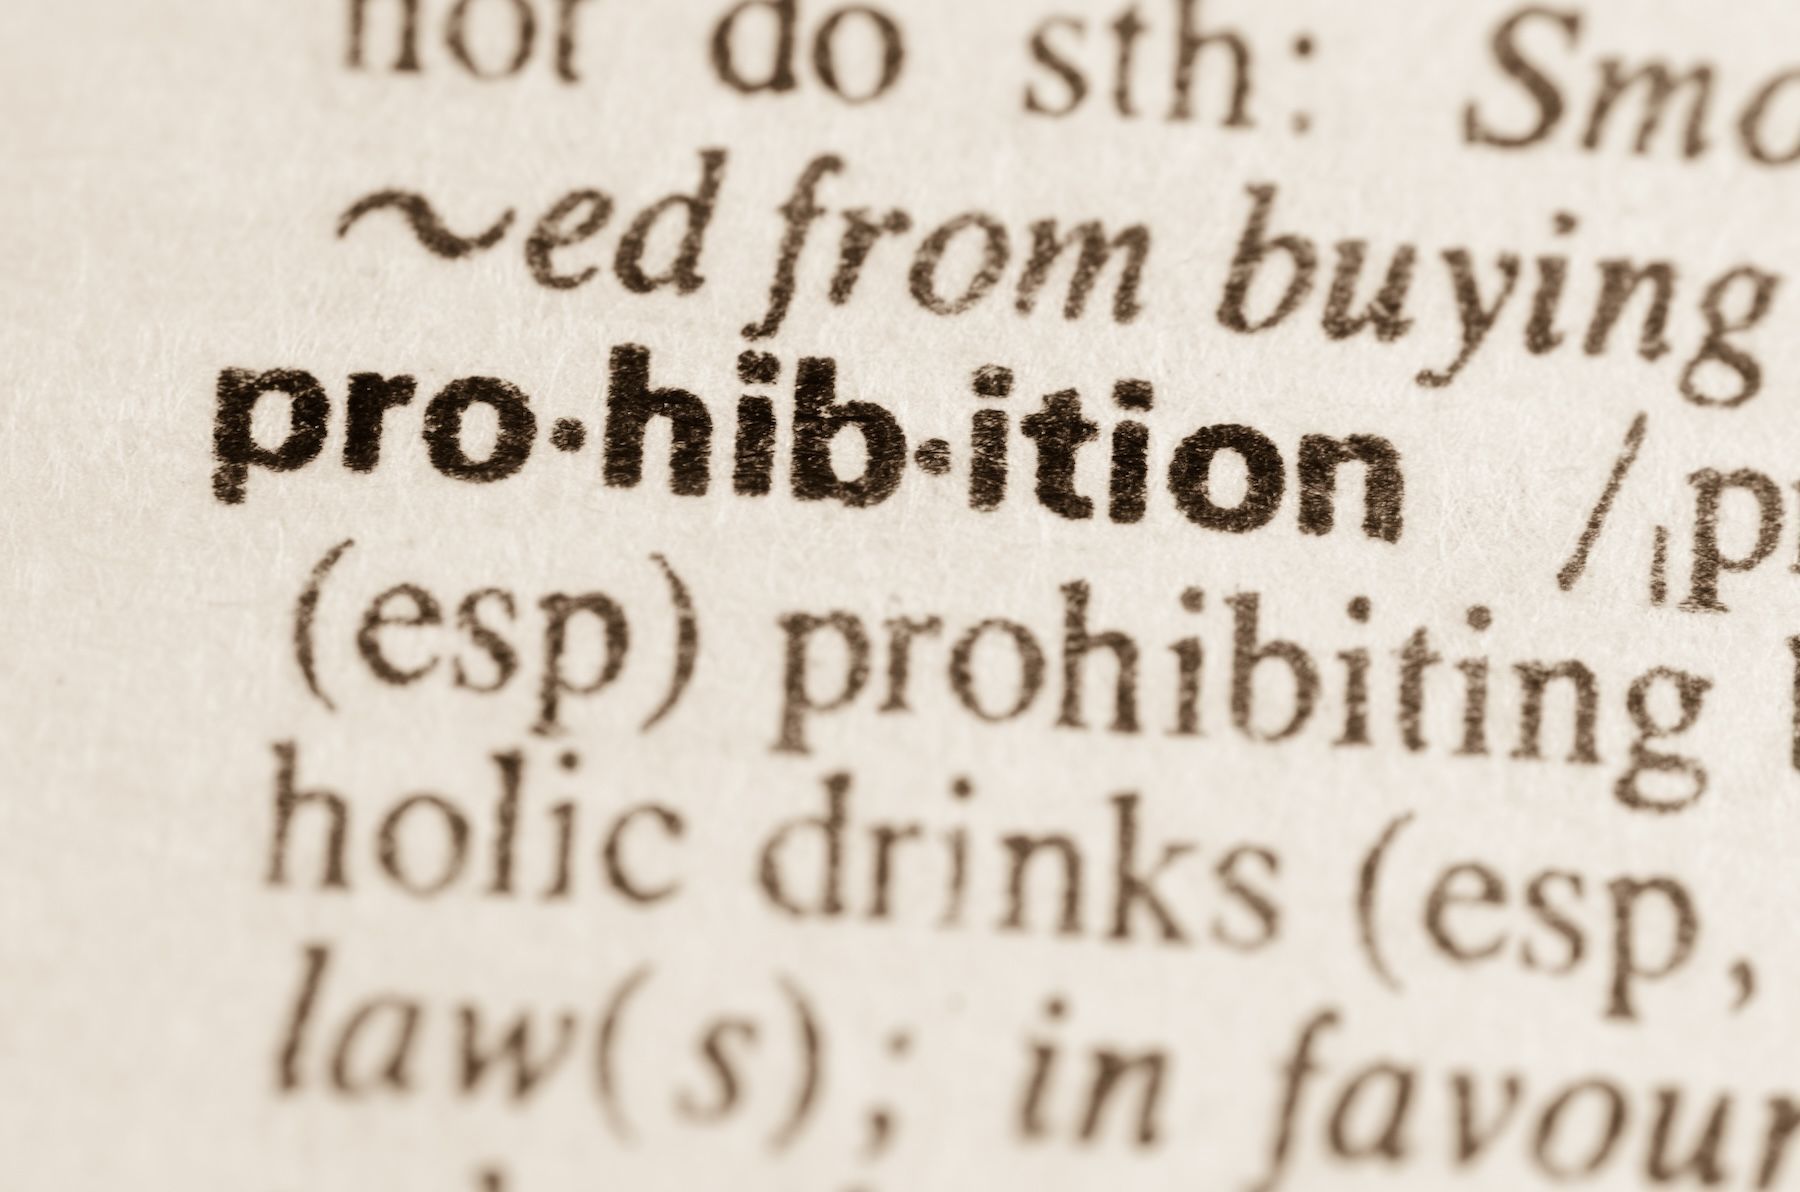 Prohibition definition in old type